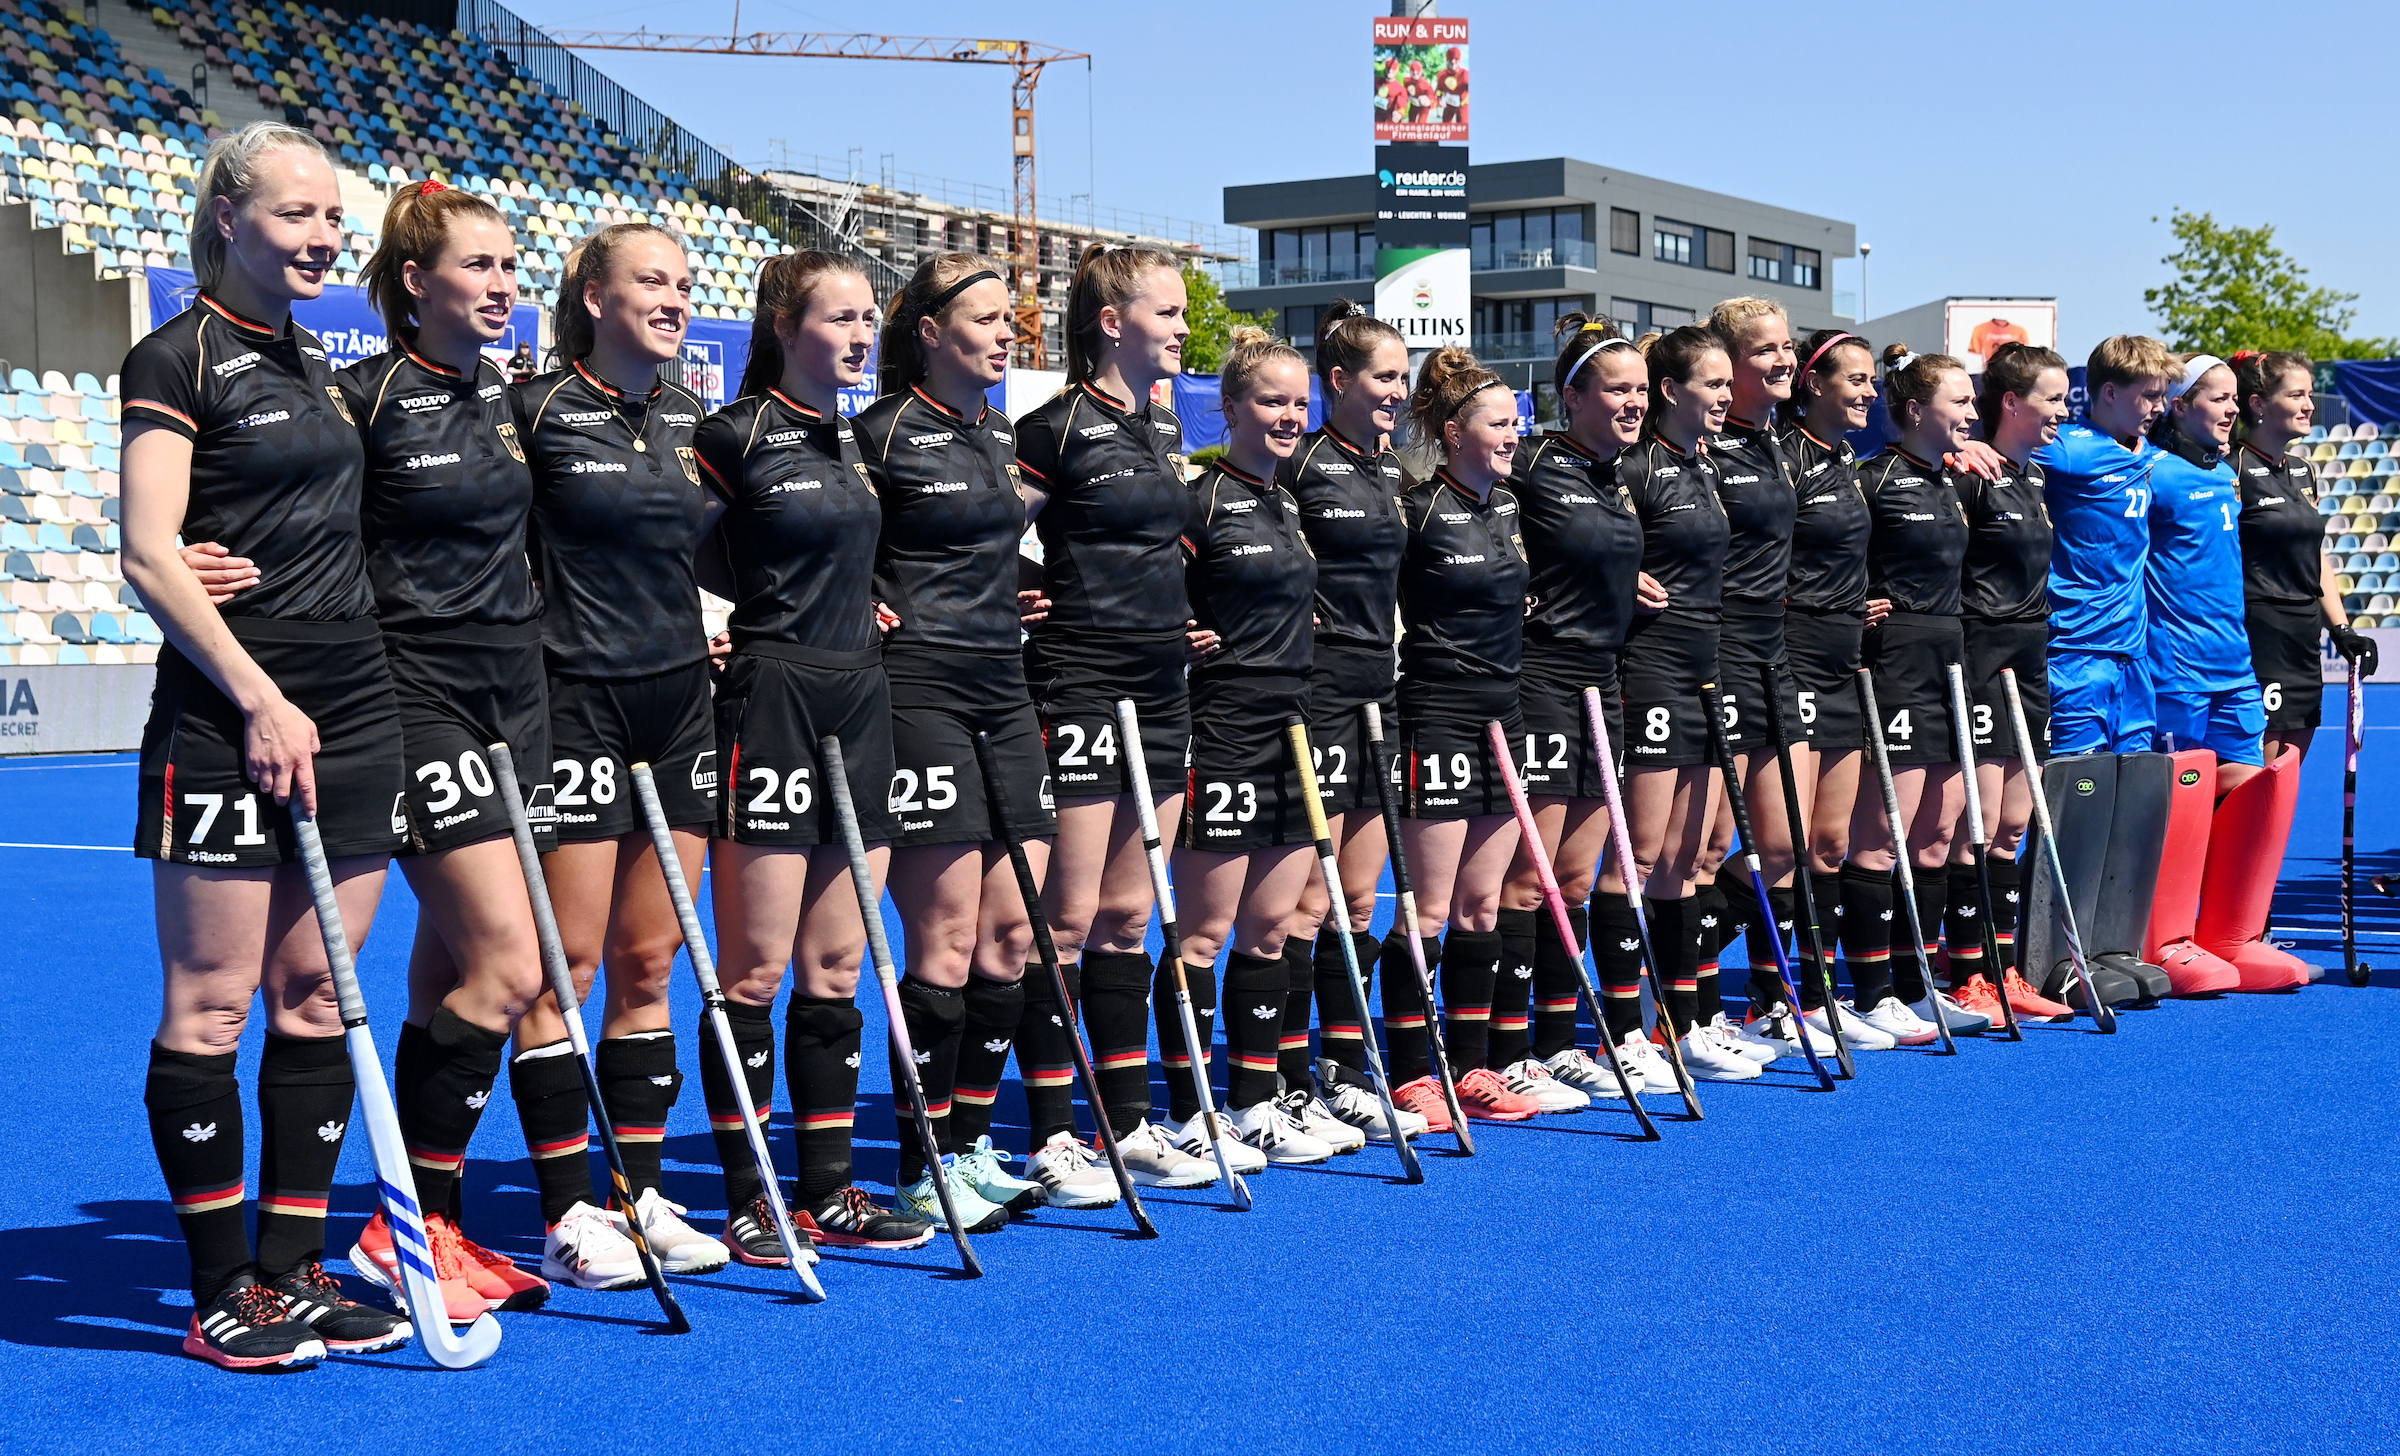 WSP2205049459 - Pro-League: The Danas Narrowly Lose 4-3 to Athletic England Women - In the FIH Pro League, the Danas met the English selection today, May 4th. In the first of two games at SparkassenPark Mönchengladbach, coach Valentin Altenburg's team had to admit defeat 3:4 after 60 minutes. The goals for Germany were scored by Hannah Gablac, Nike Lorenz and Sonja Zimmermann. Tessa Howard, Grace Balsdon and twice Darcy Bourne scored for the England.